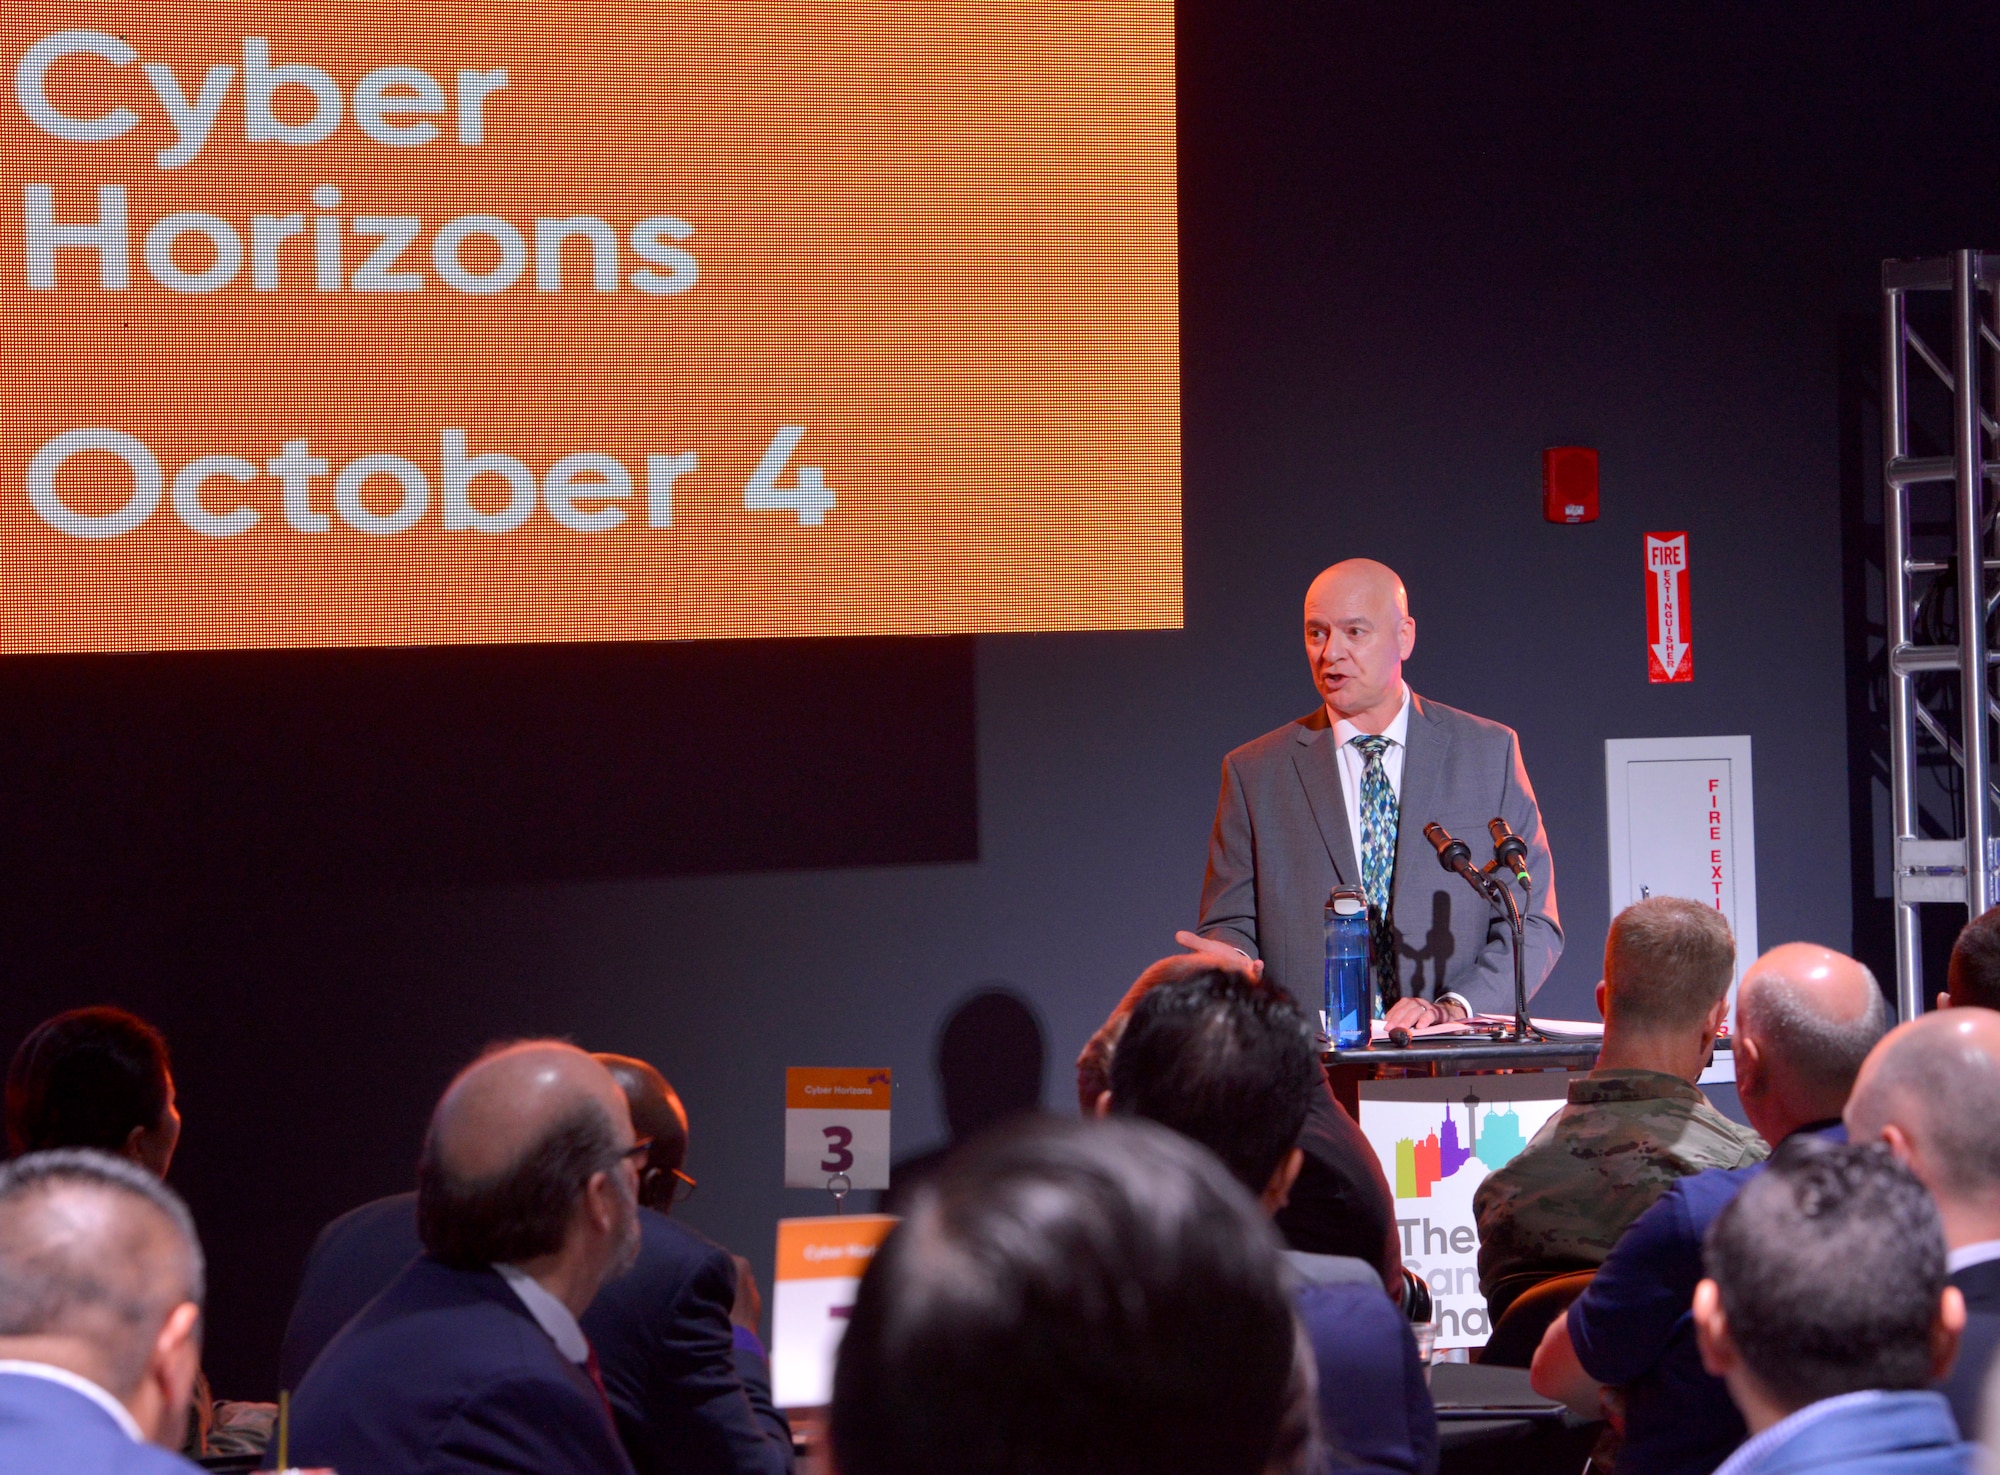 16th Air Force technical director speaks to more than 100 attendees about cyber threats at Cyber Horizons event.